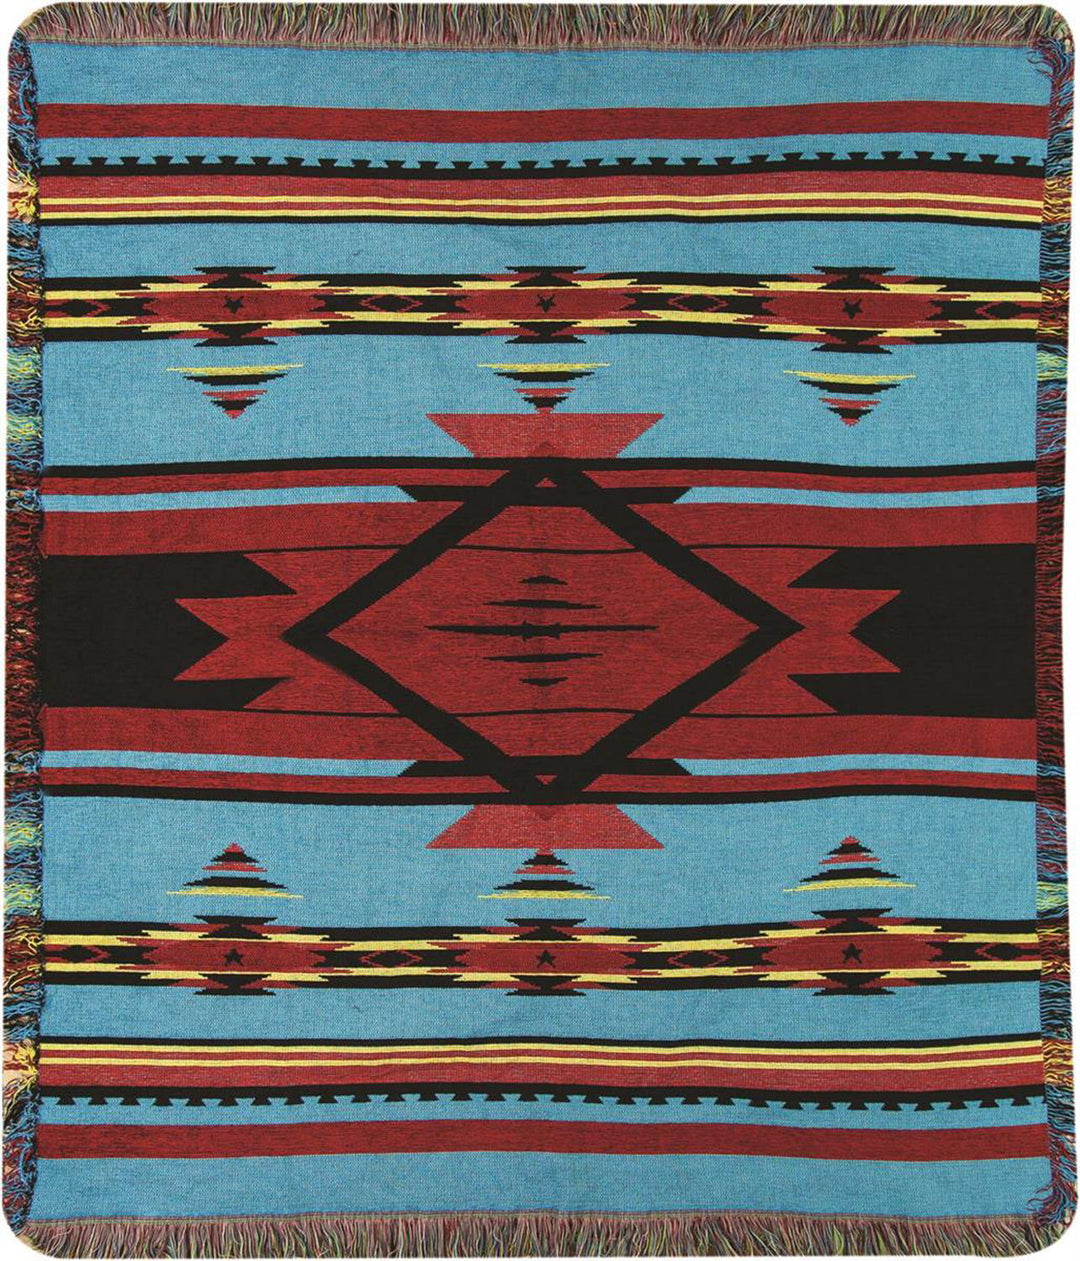 Flame Bright tapestry throw